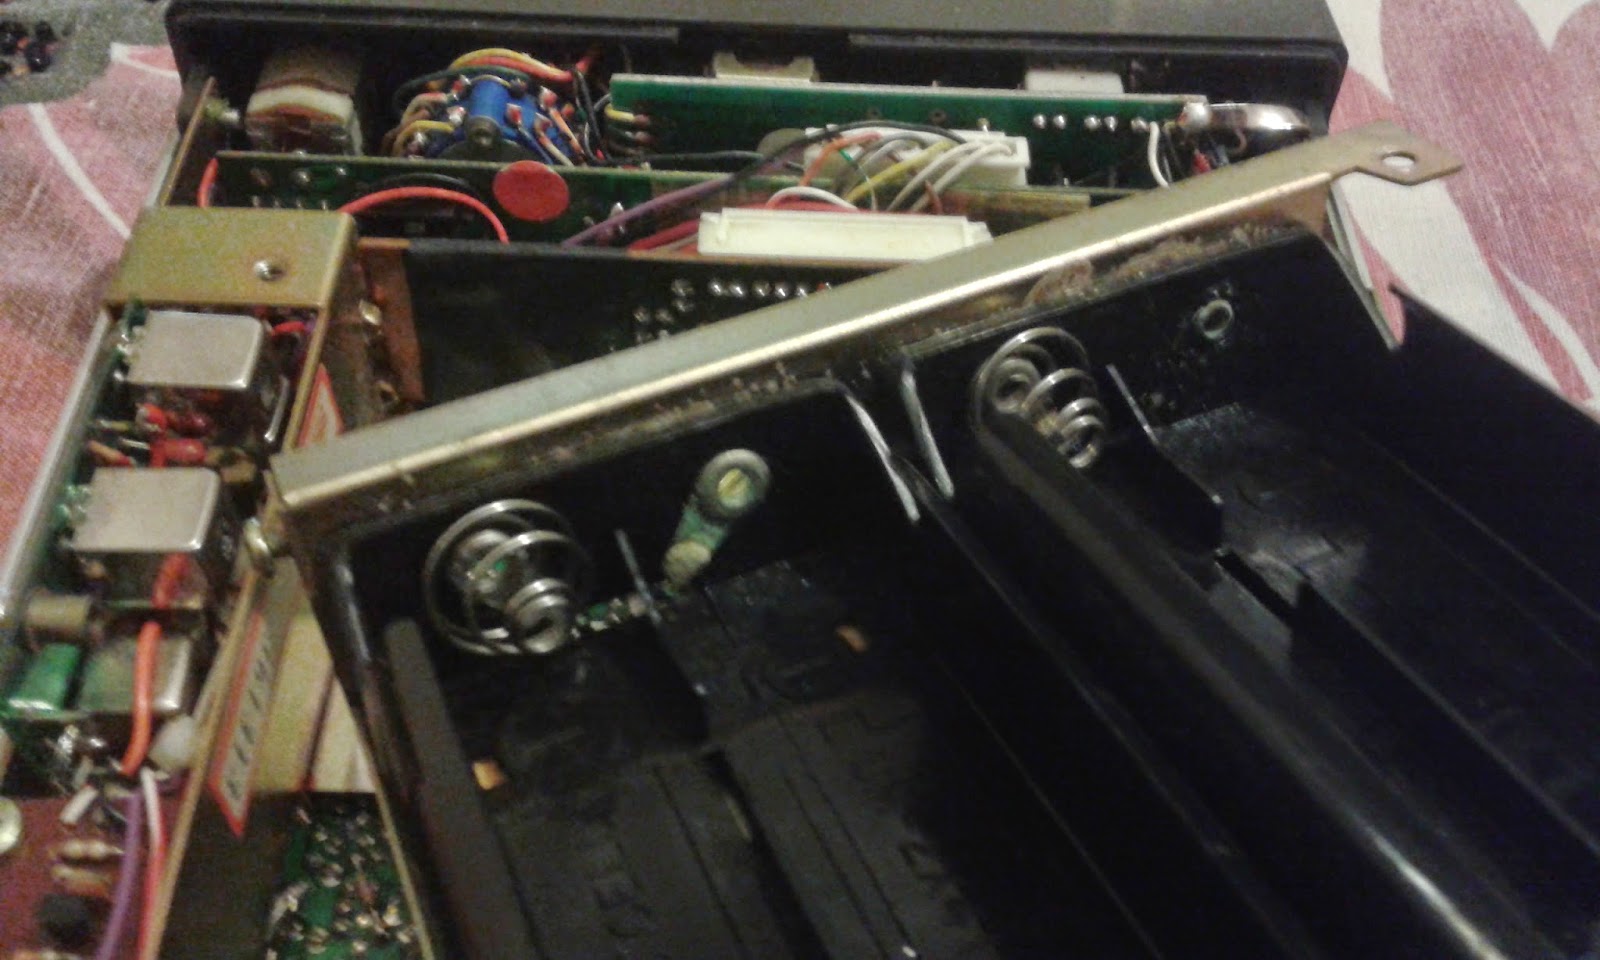 The continuing saga of Barf: FT-290R-mk1 Battery Compartment repairs